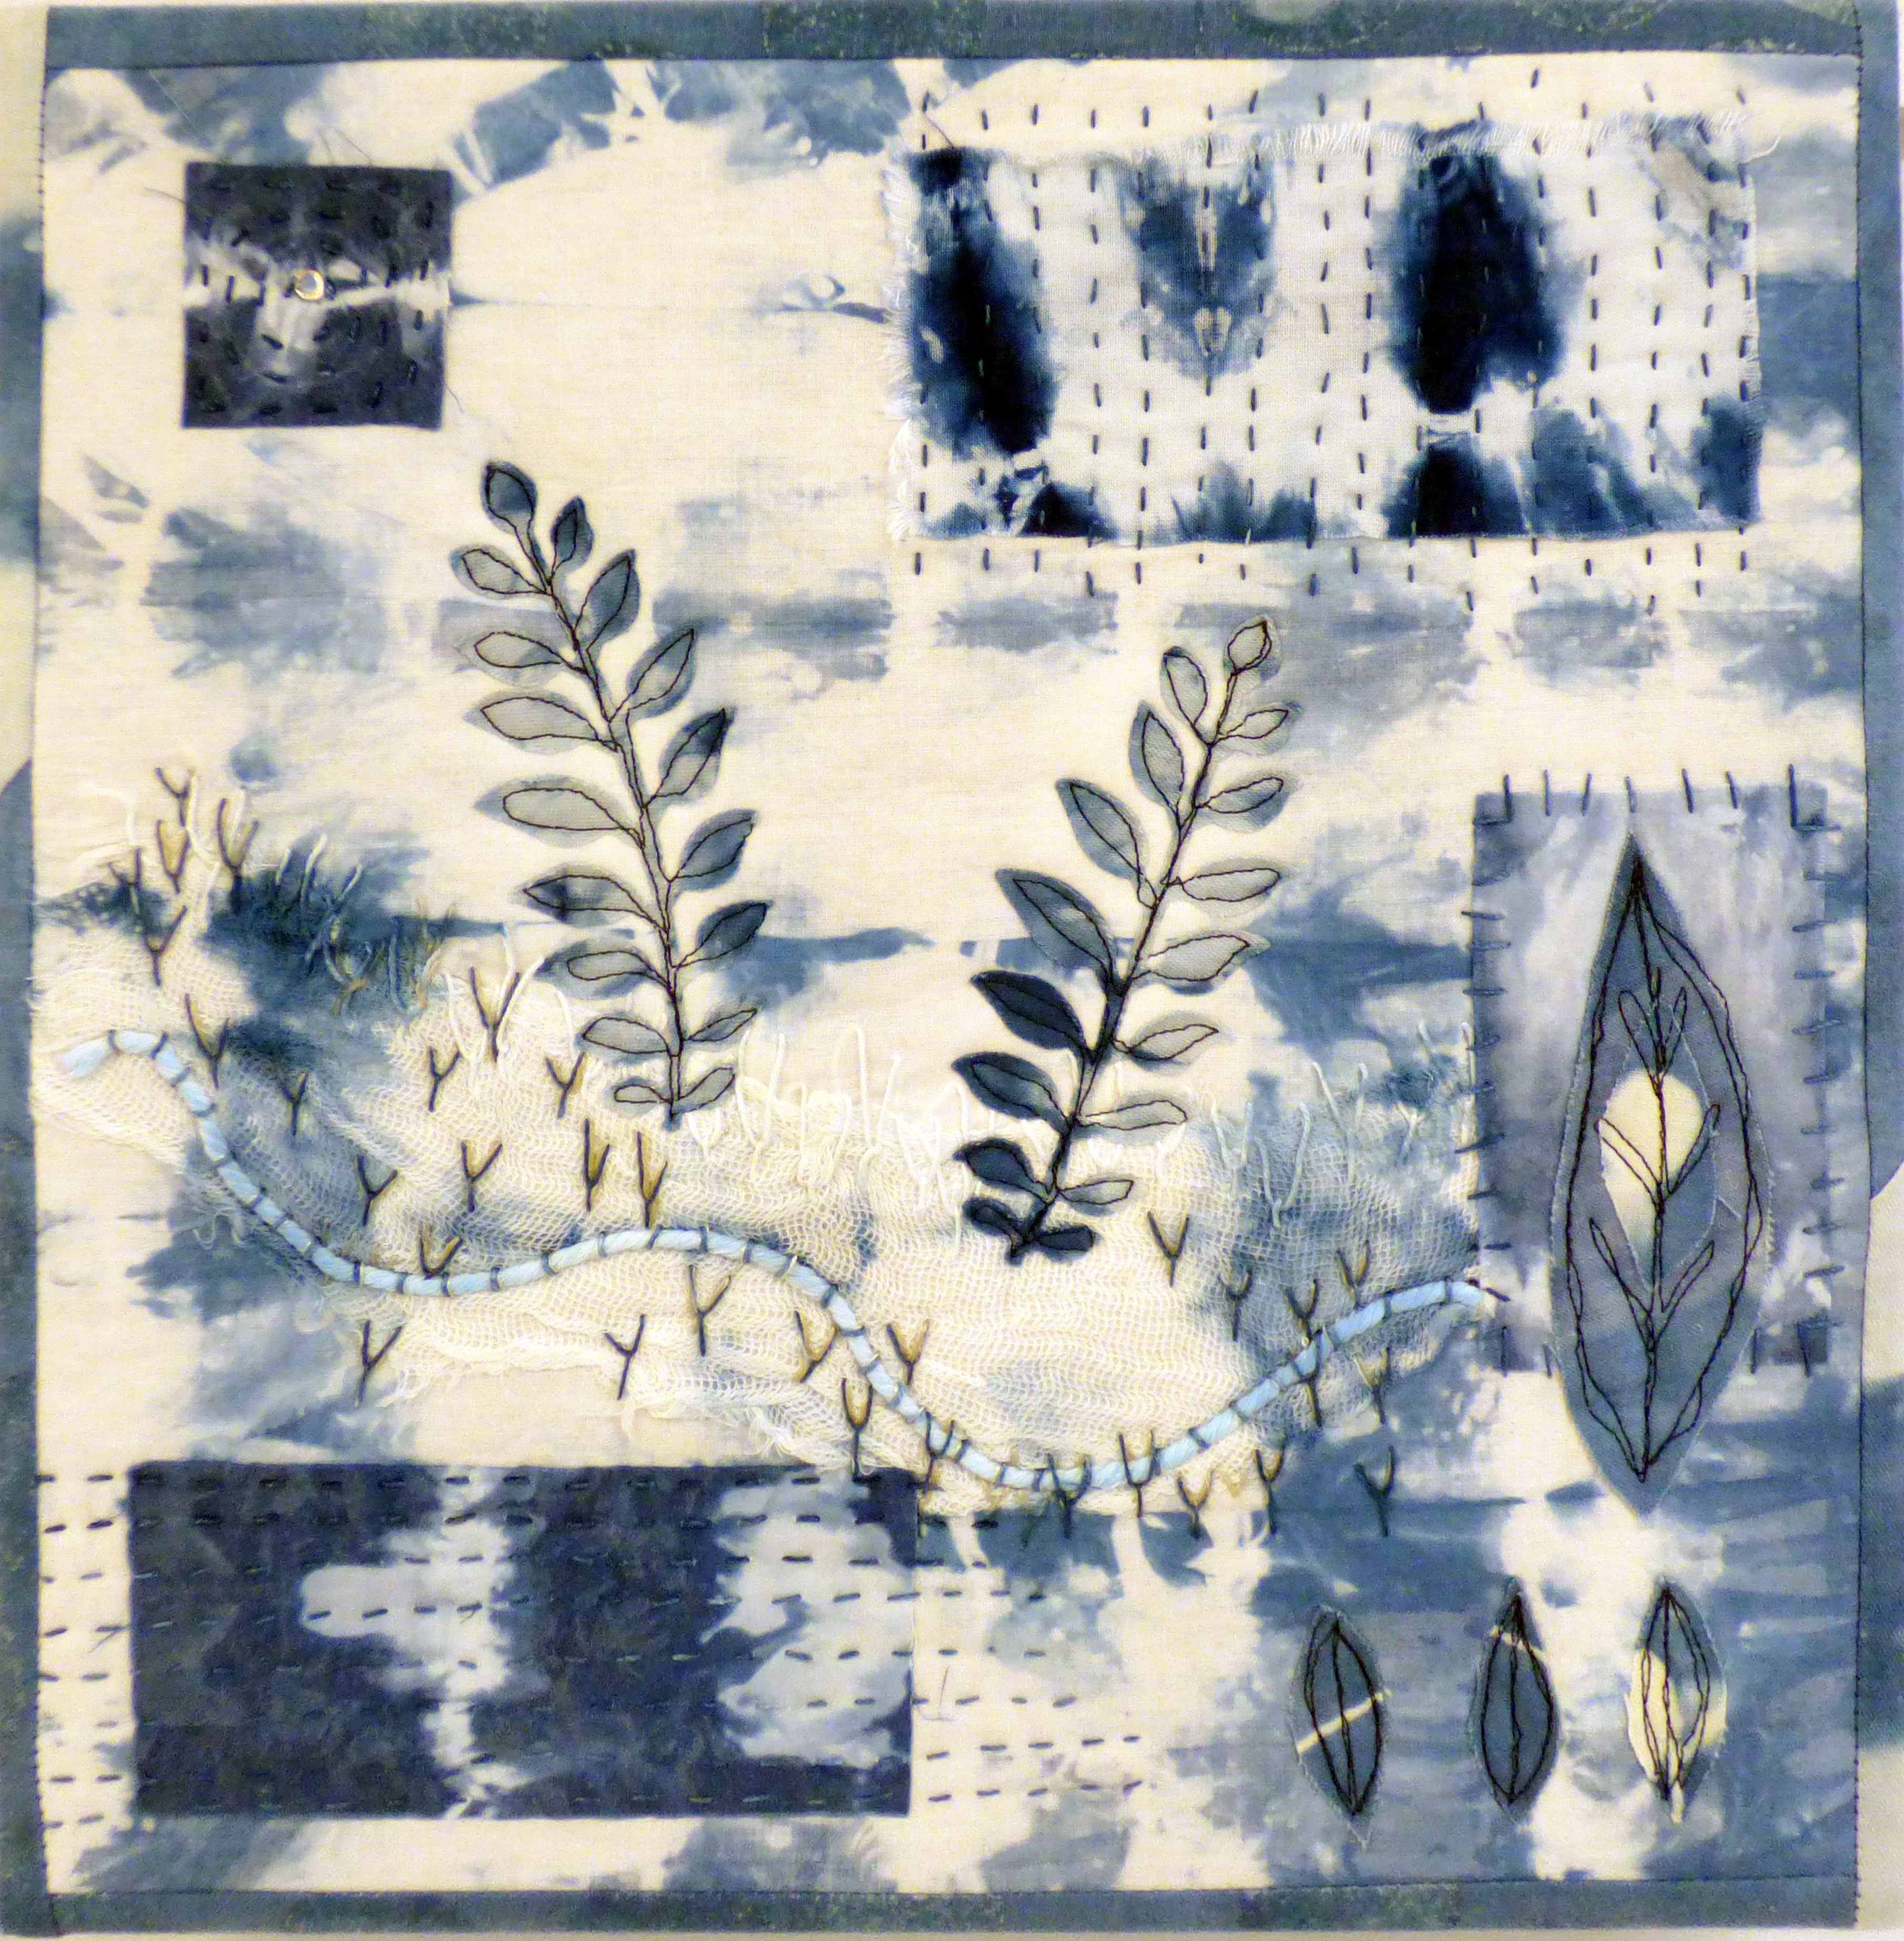 SHADES OF H2O 2 by Sue Gilchrist, hand dyed fabric collage, ConText group 2018